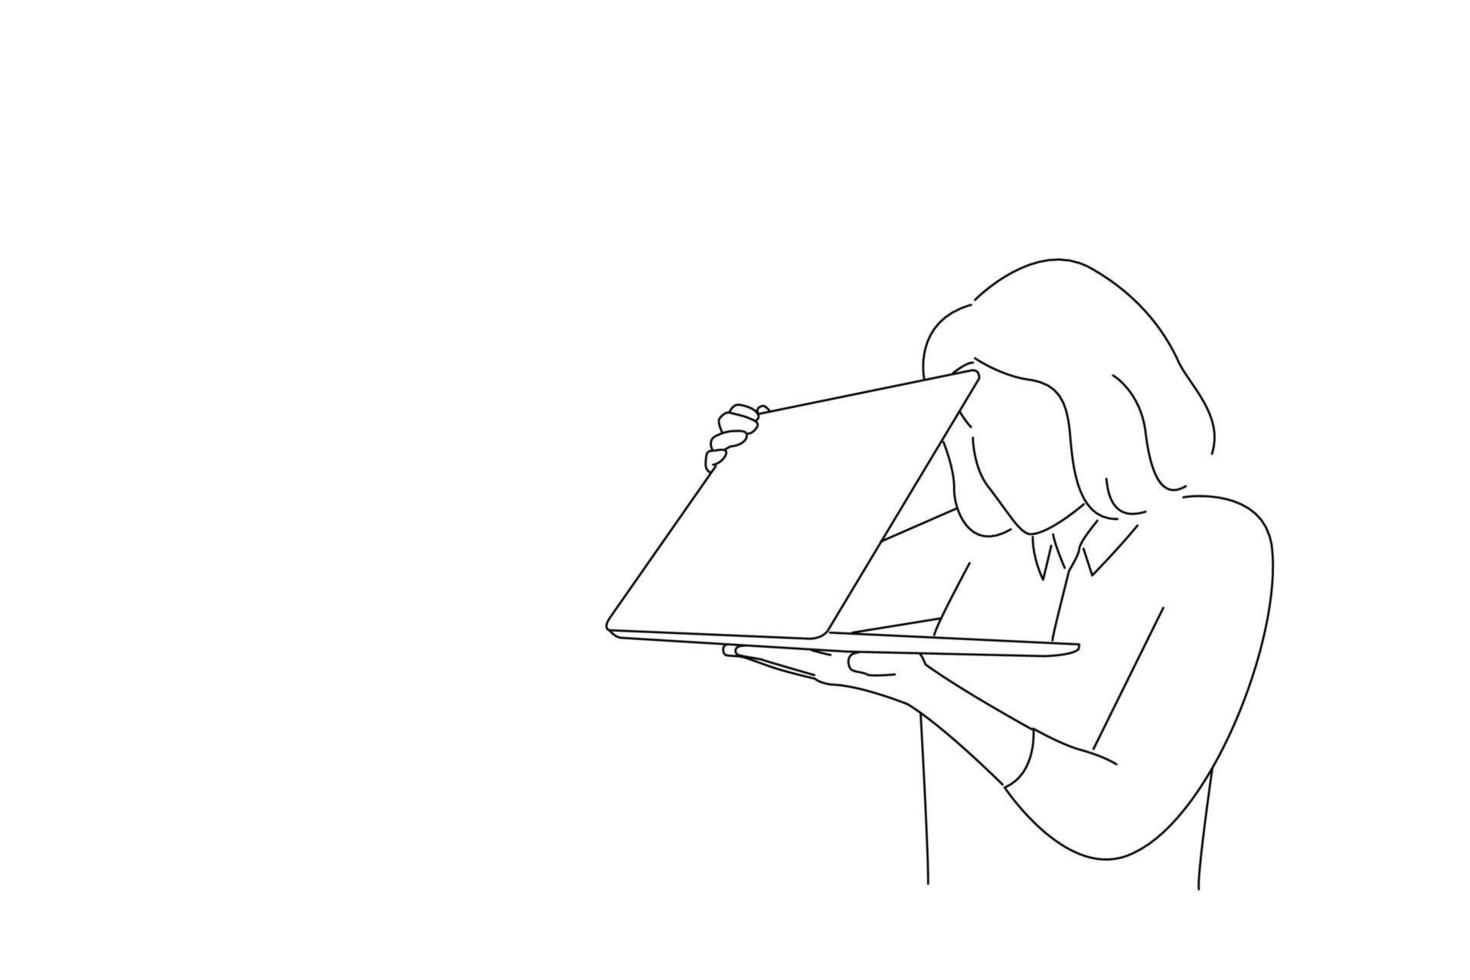 Drawing of shocked frightened woman looking furtively at half closed laptop screen, upset scared of error. Outline drawing style art vector